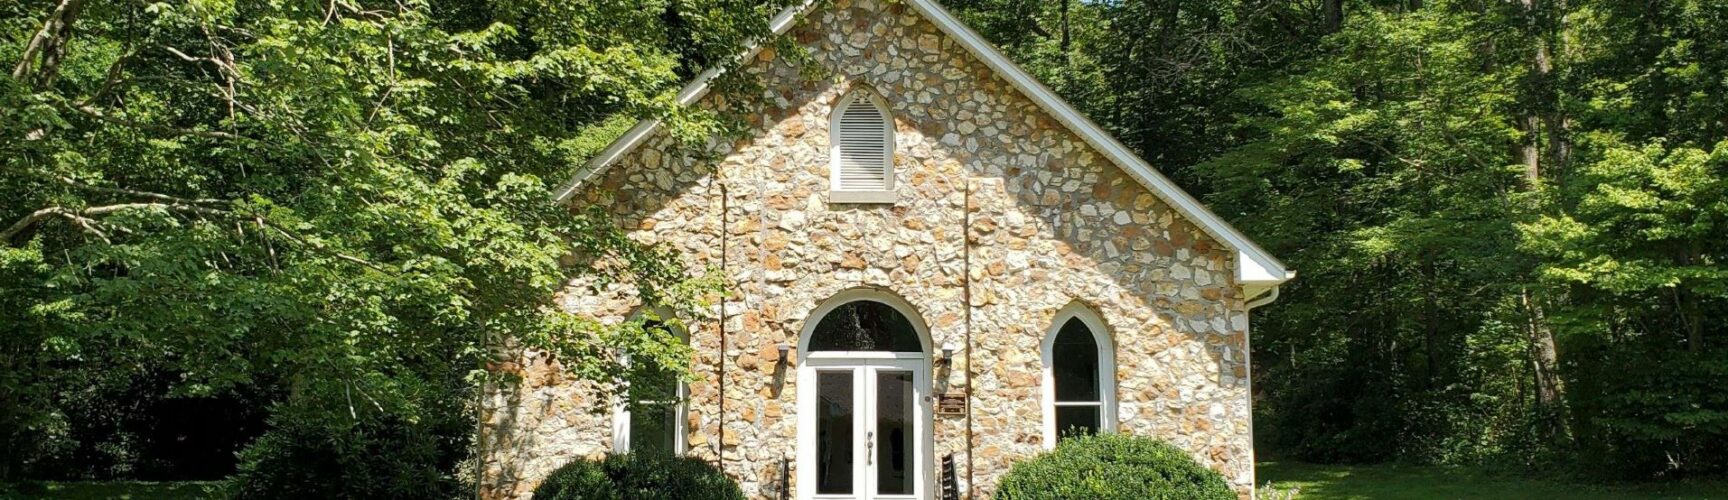 The Rock Churches – Because There's More.